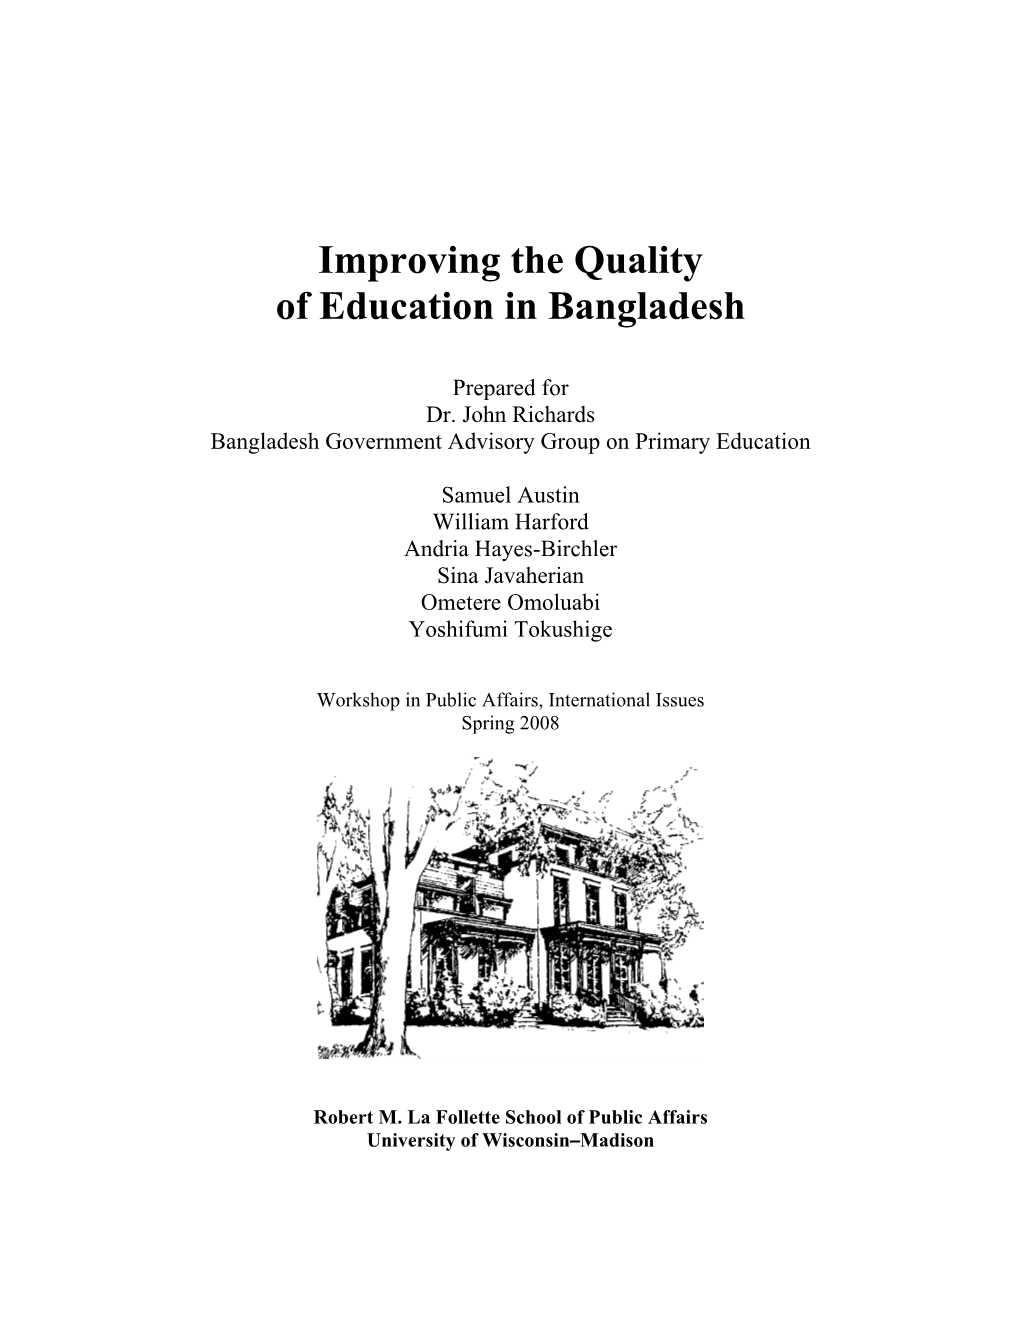 Improving the Quality of Education in Bangladesh